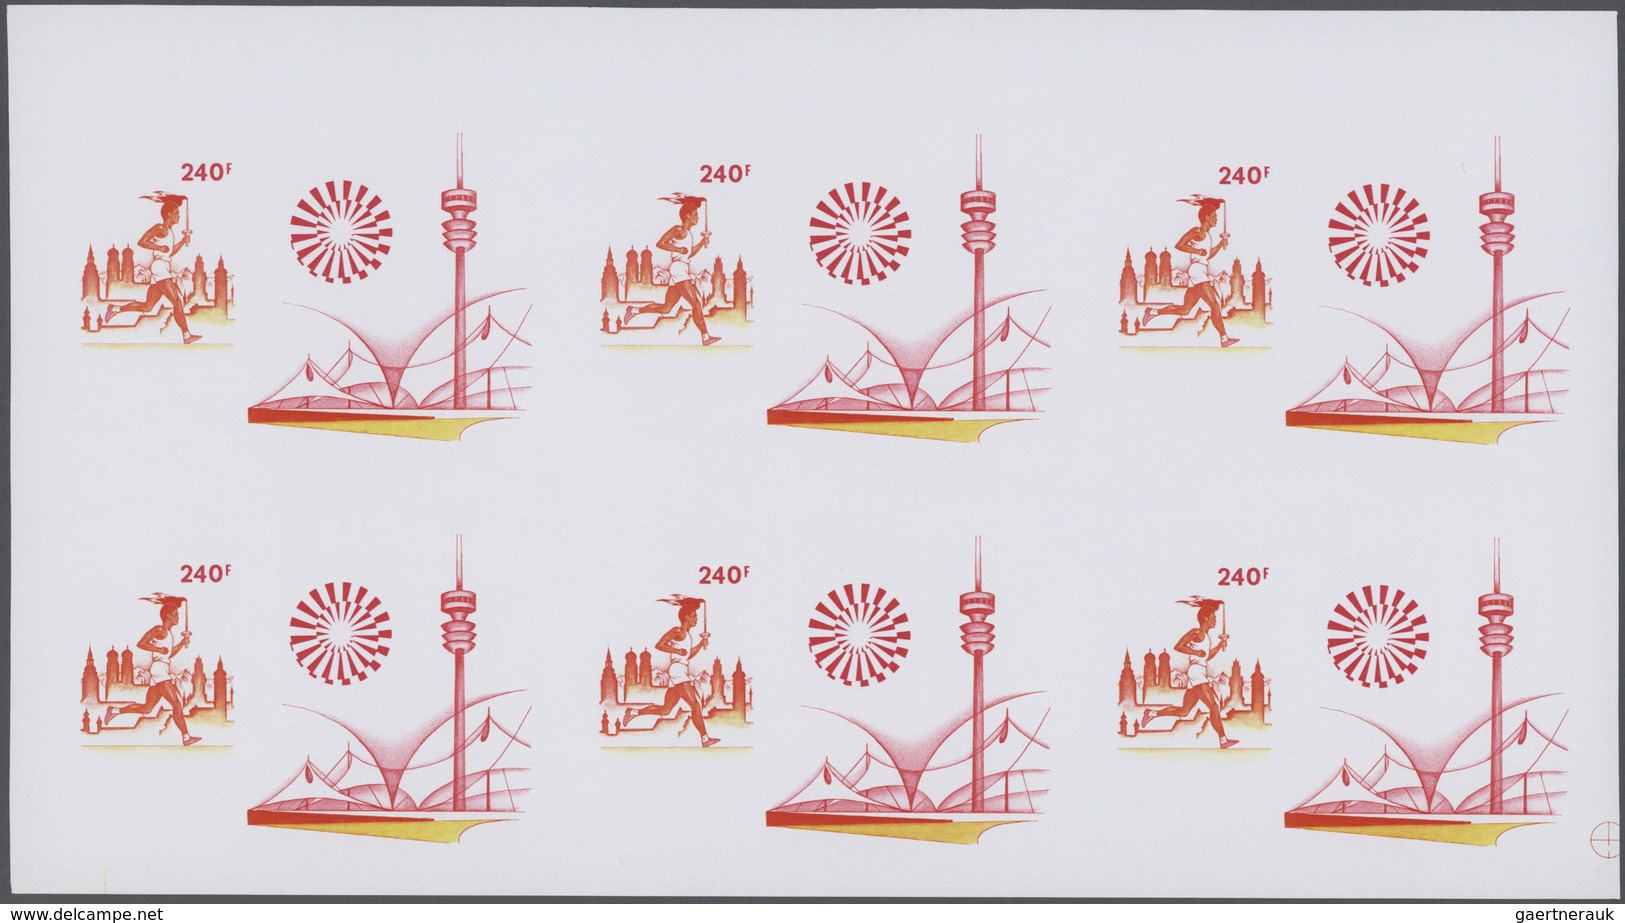 25314 Thematik: Olympische Spiele / olympic games: 1972, Senegal. Progressive proofs set of sheets for the